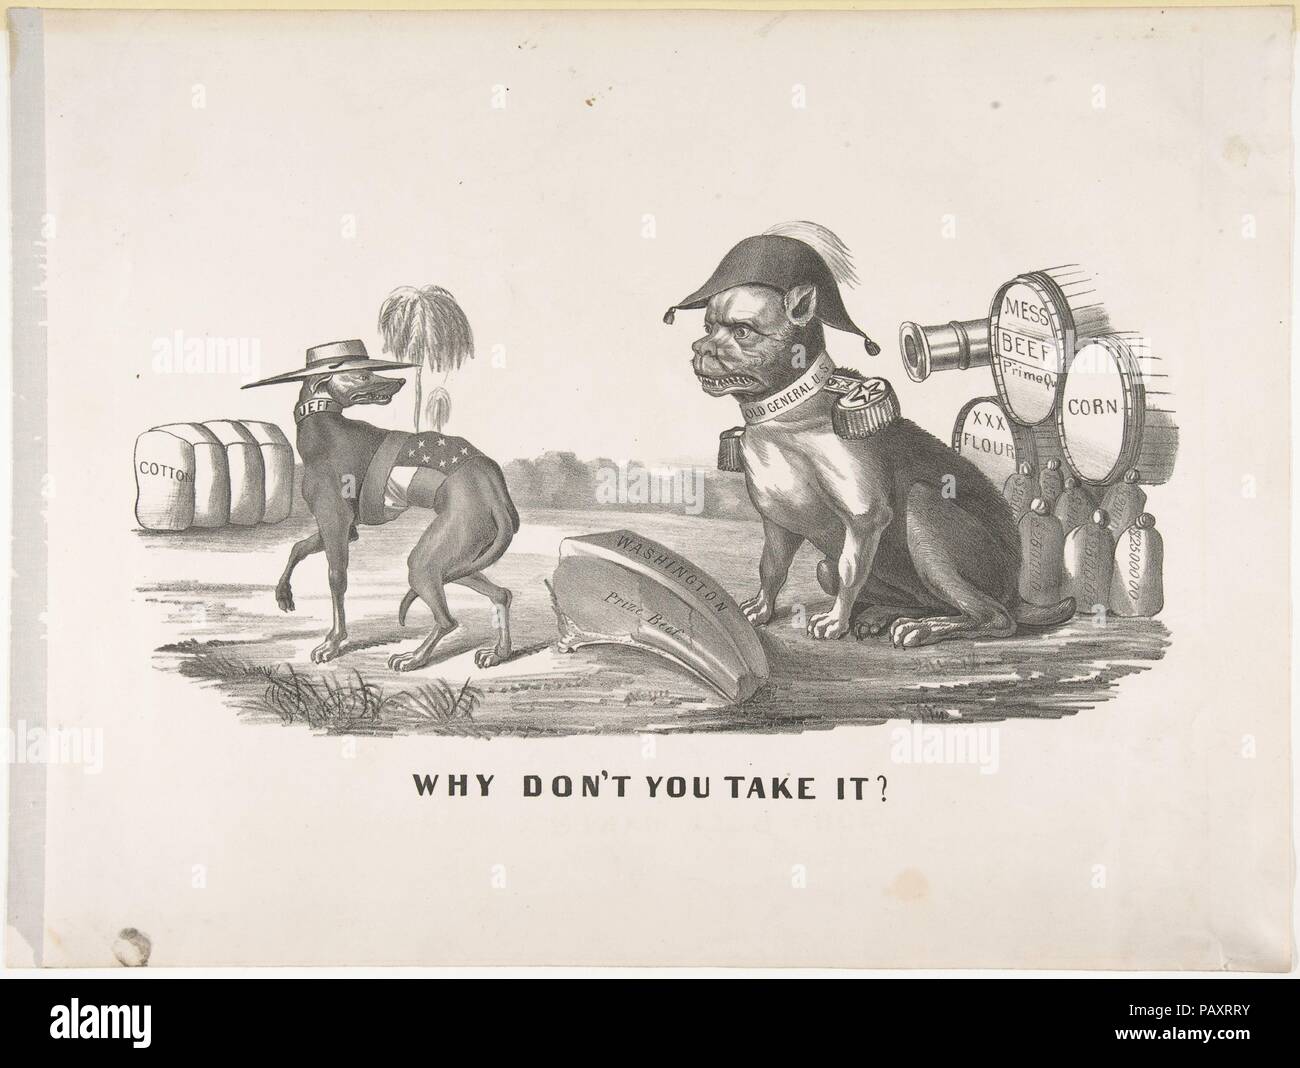 Why Don't You Take It?. Artist: Currier & Ives (American, active New York, 1857-1907). Dimensions: sheet: 13 3/8 x 17 7/8 in. (34 x 45.4 cm). Date: 1861-64. Museum: Metropolitan Museum of Art, New York, USA. Stock Photo